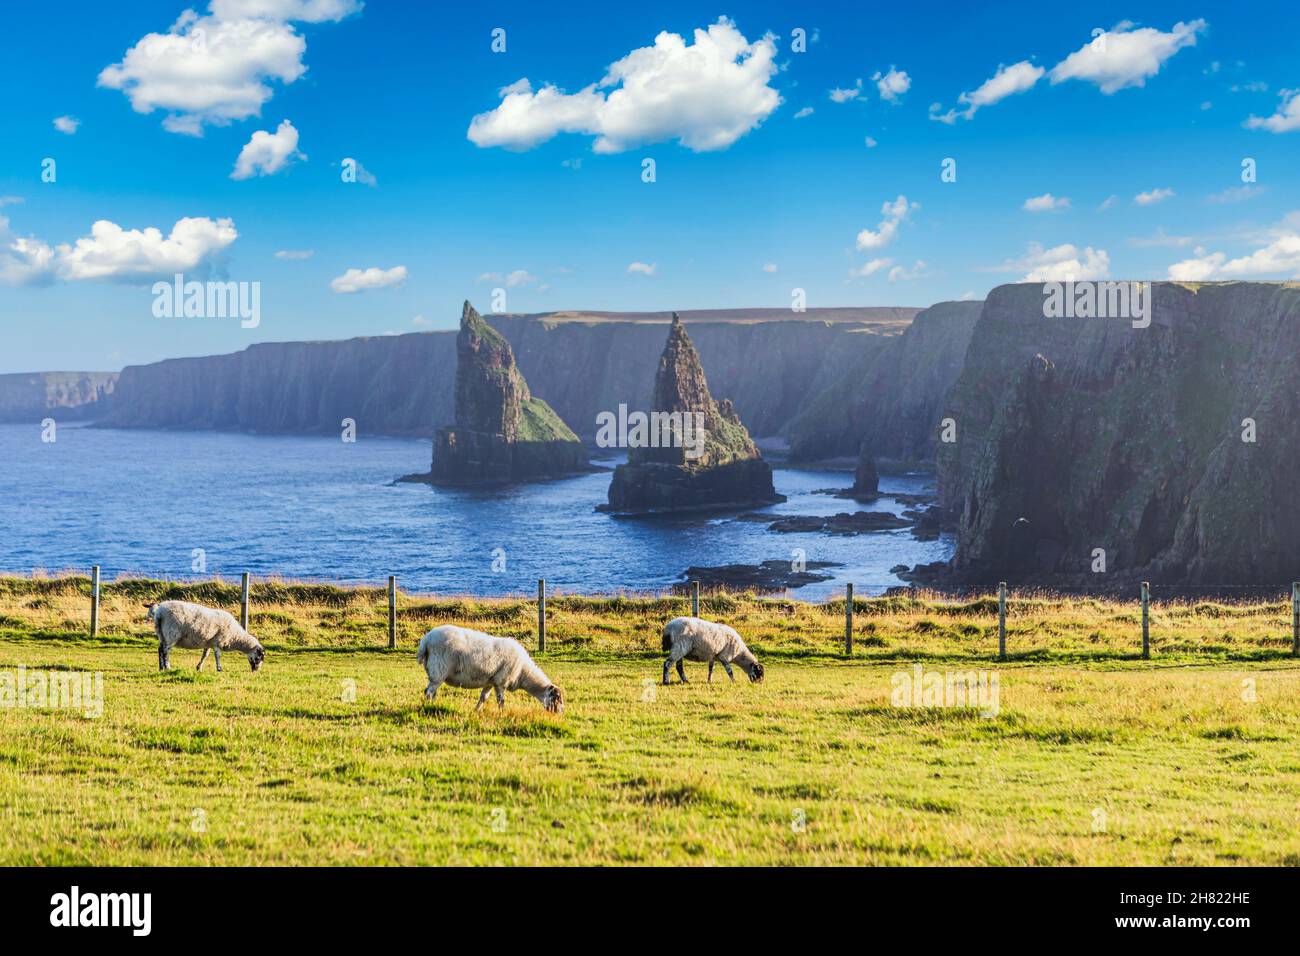 Sunset at Stacks of Duncansby, with a flock of sheep grazing, Duncansby Head, John or 'Groats, Caithness, Scotland, United Kingdom Stock Photo